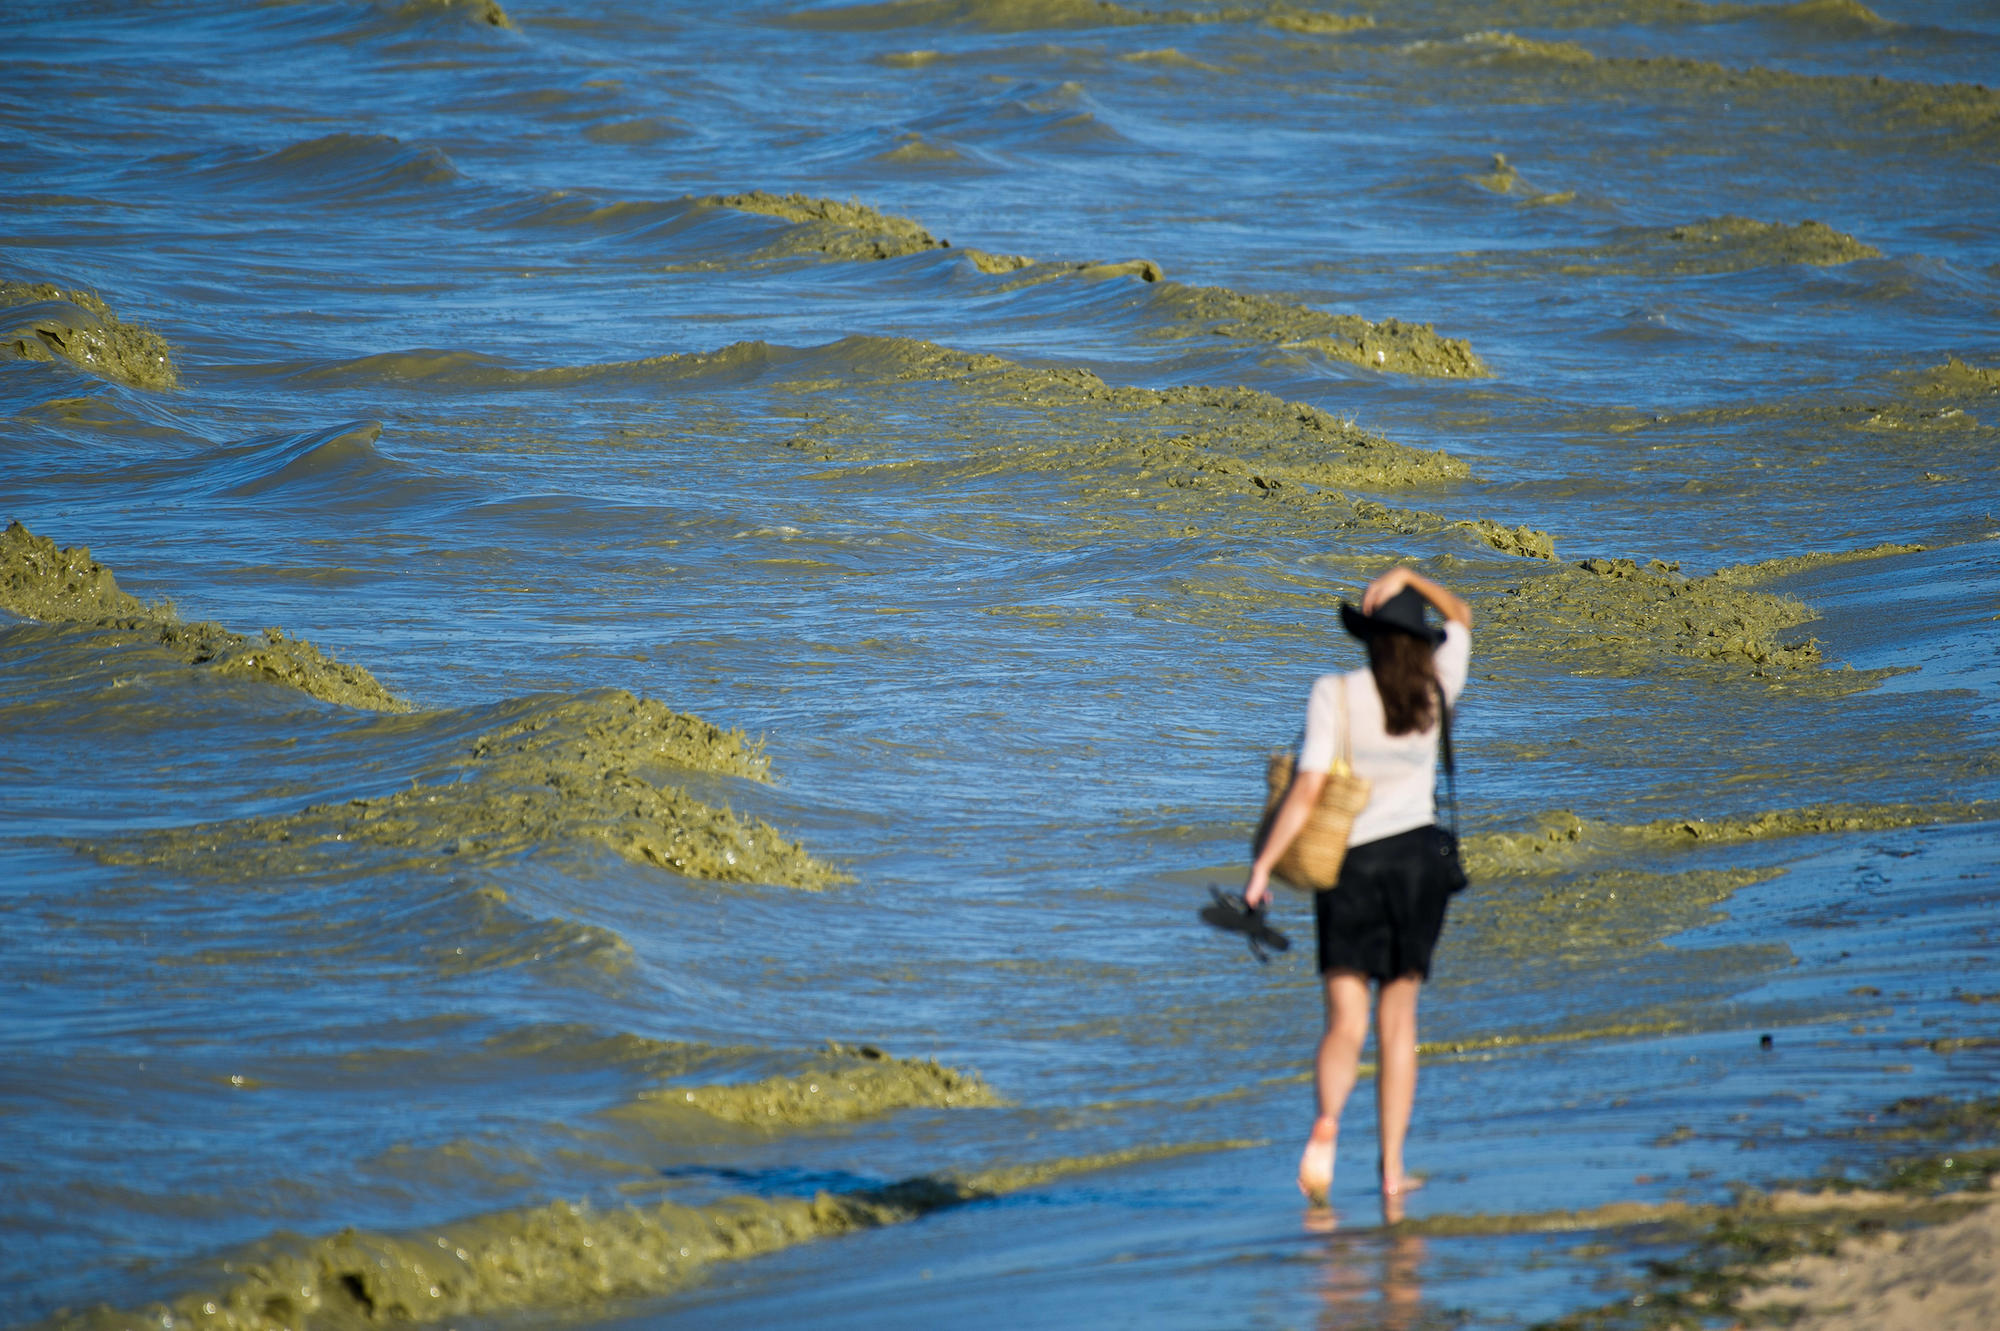 Gdansk beach covered toxic algal bloom due to ocean deoxygenation